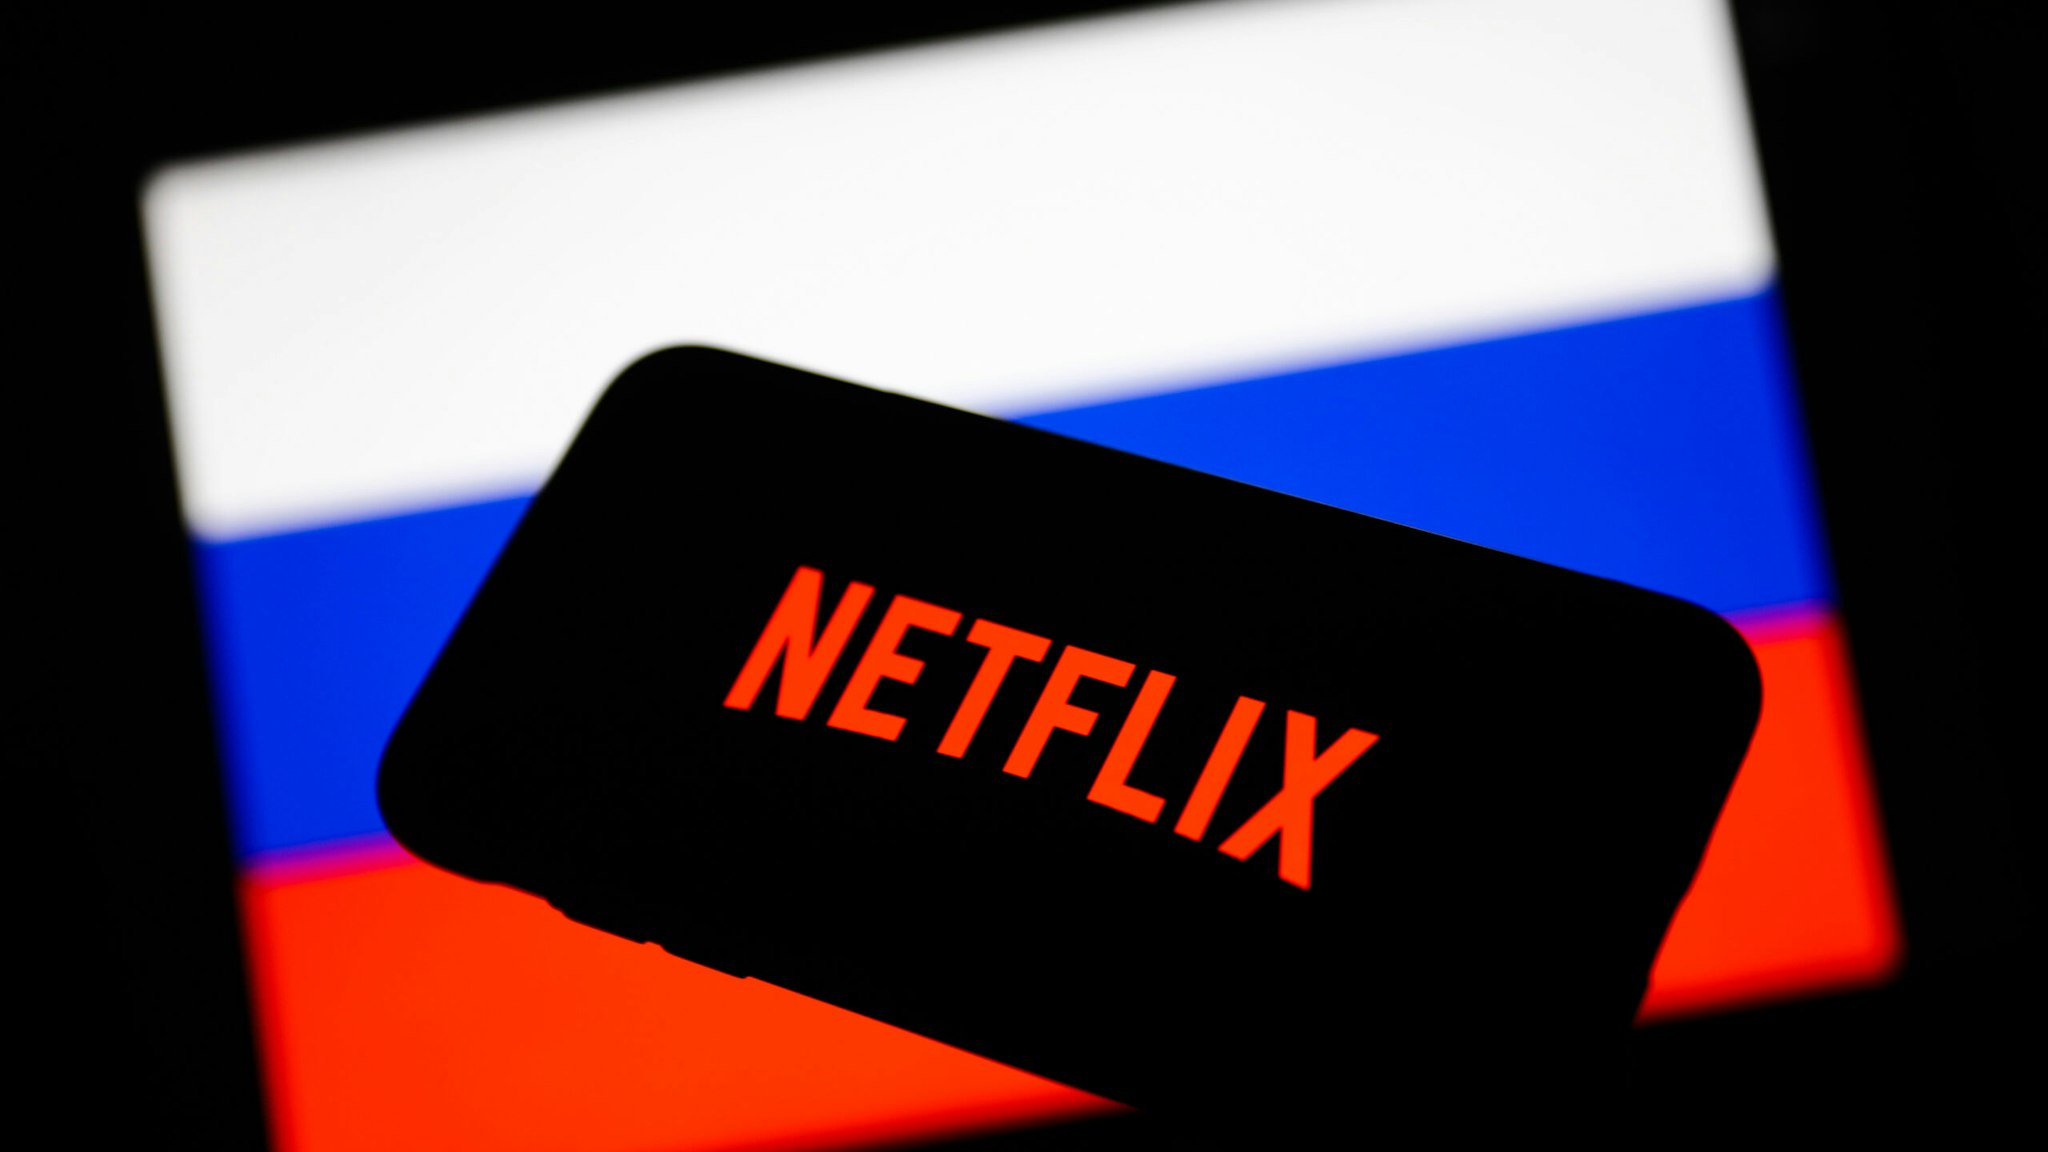 Netflix logo displayed on a phone screen and Russian flag displayed on a screen in the background are seen in this illustration photo taken in Krakow, Poland on March 1, 2022.